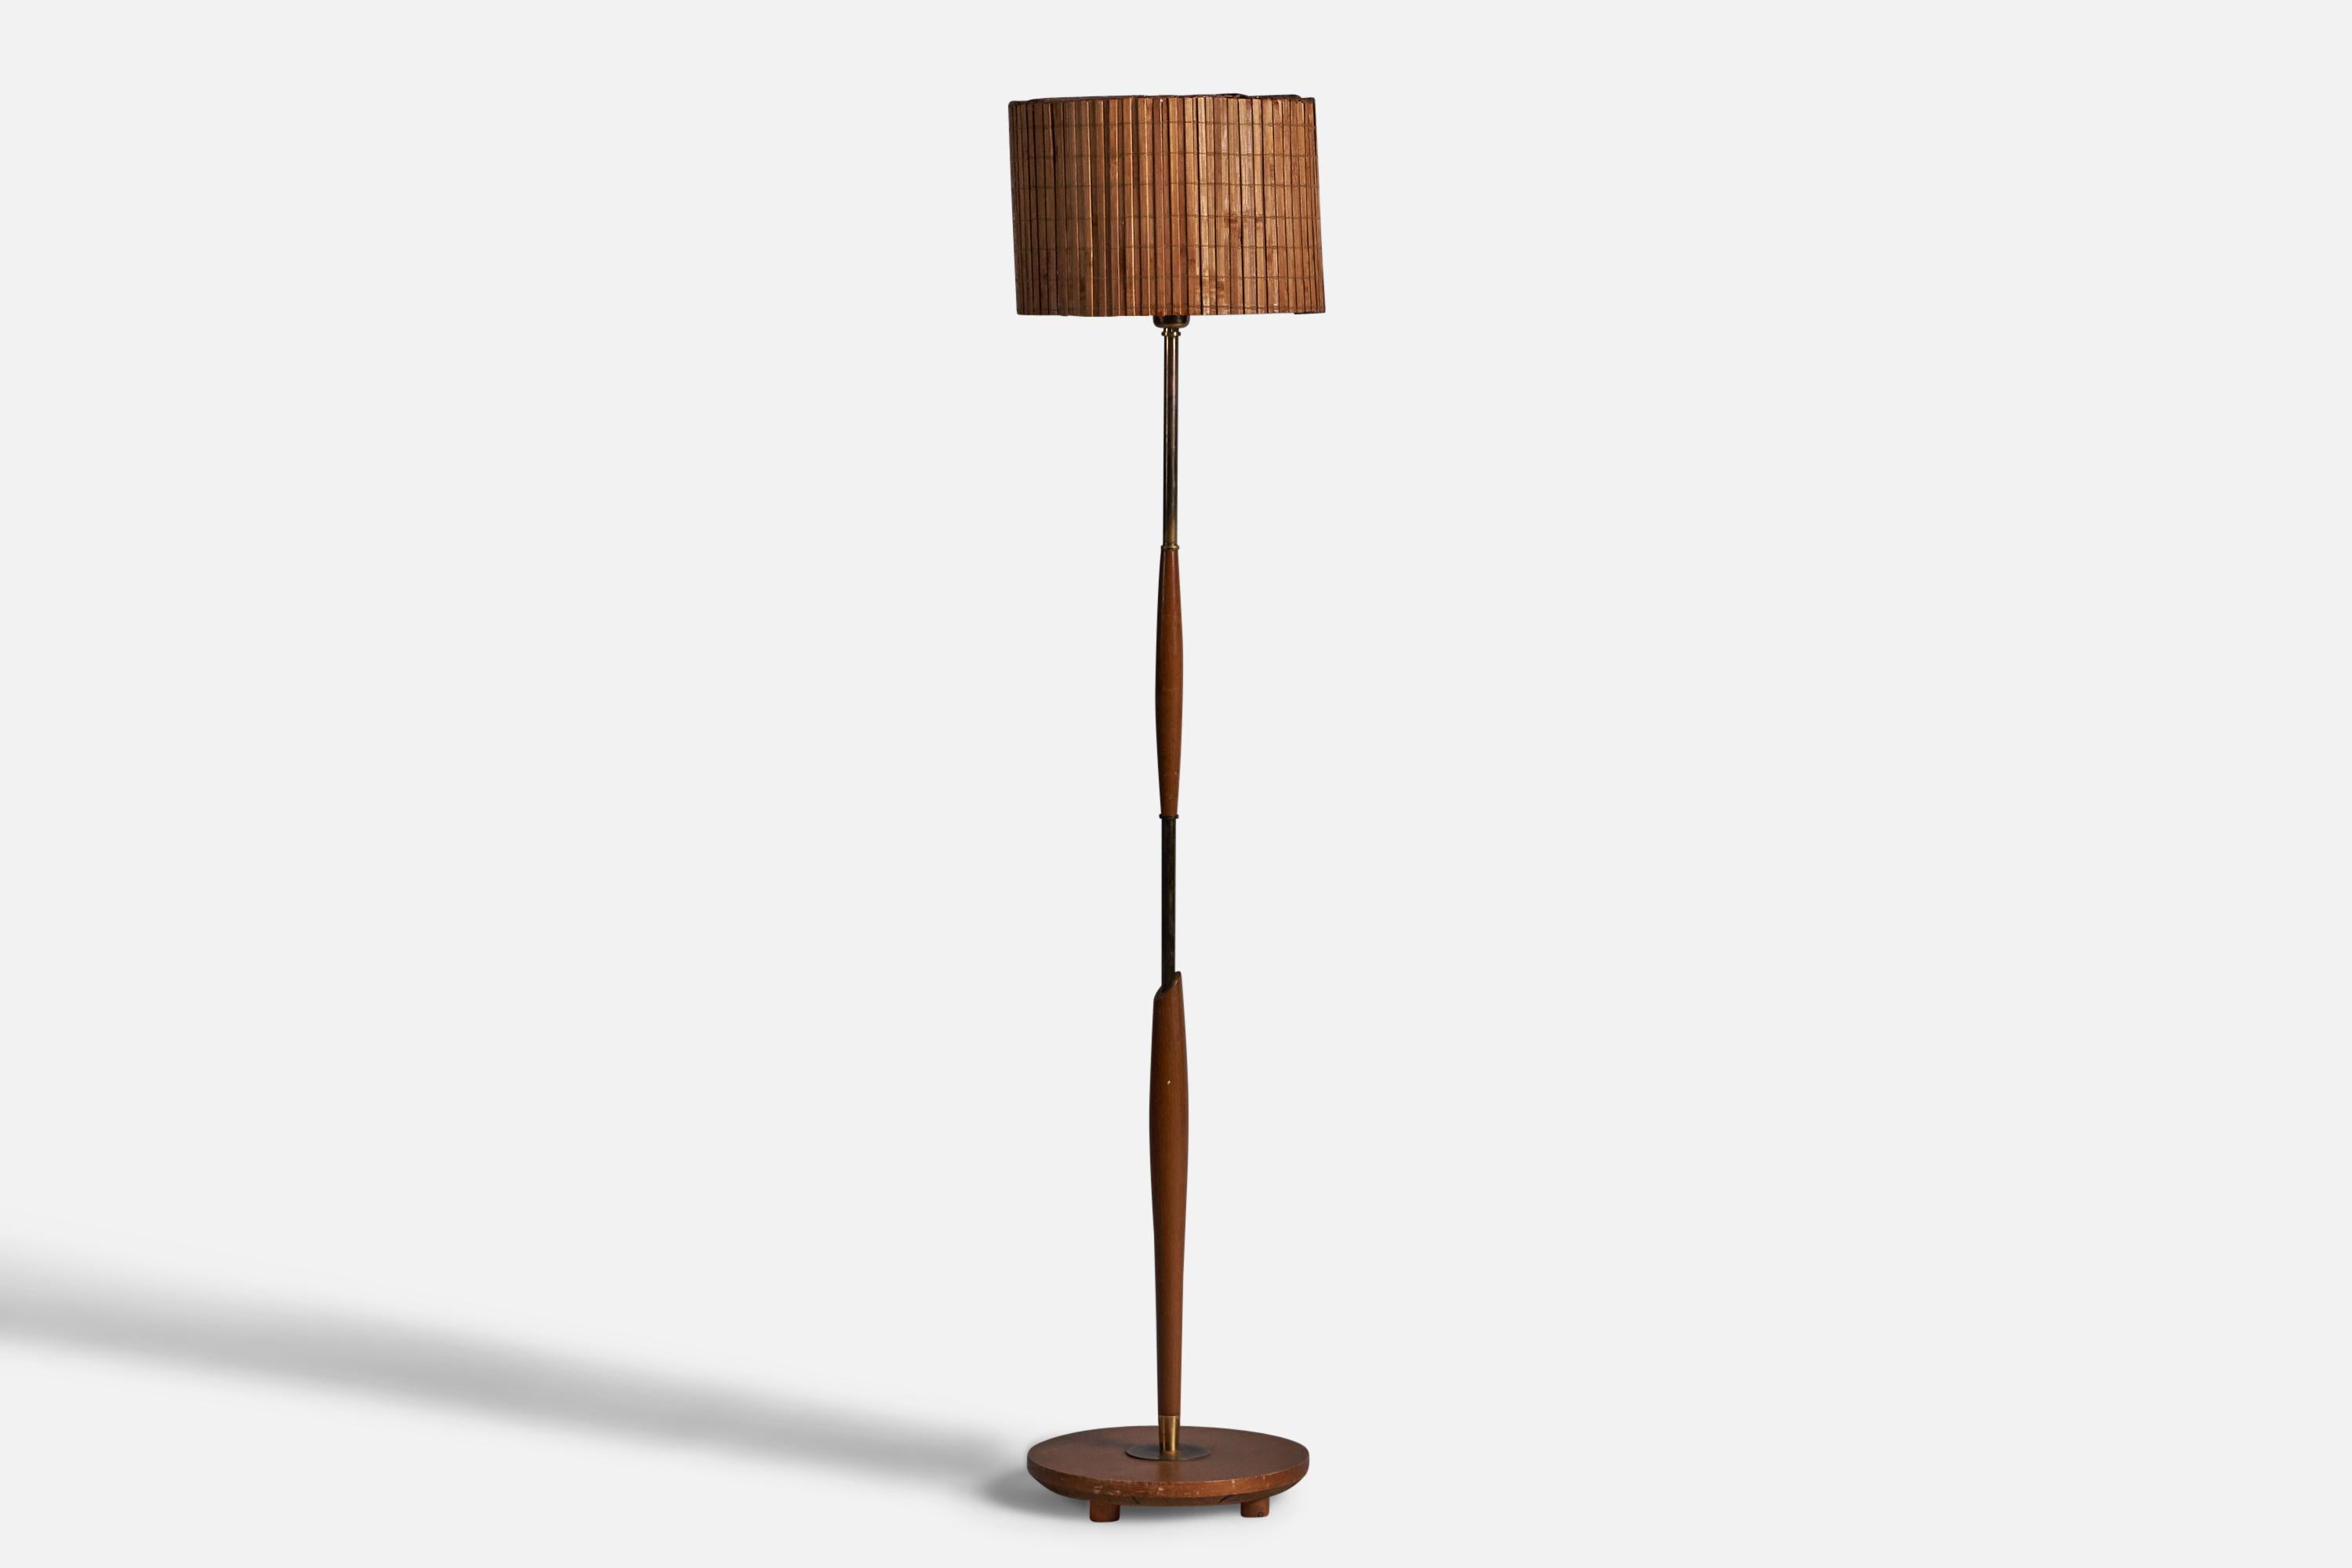 A teak, brass and woven reed floor lamp designed and produced in Sweden, c. 1950s.

Overall Dimensions (inches): 56.4” H x 12.5” Diameter
Bulb Specifications: E-26 Bulb
Number of Sockets: 1
